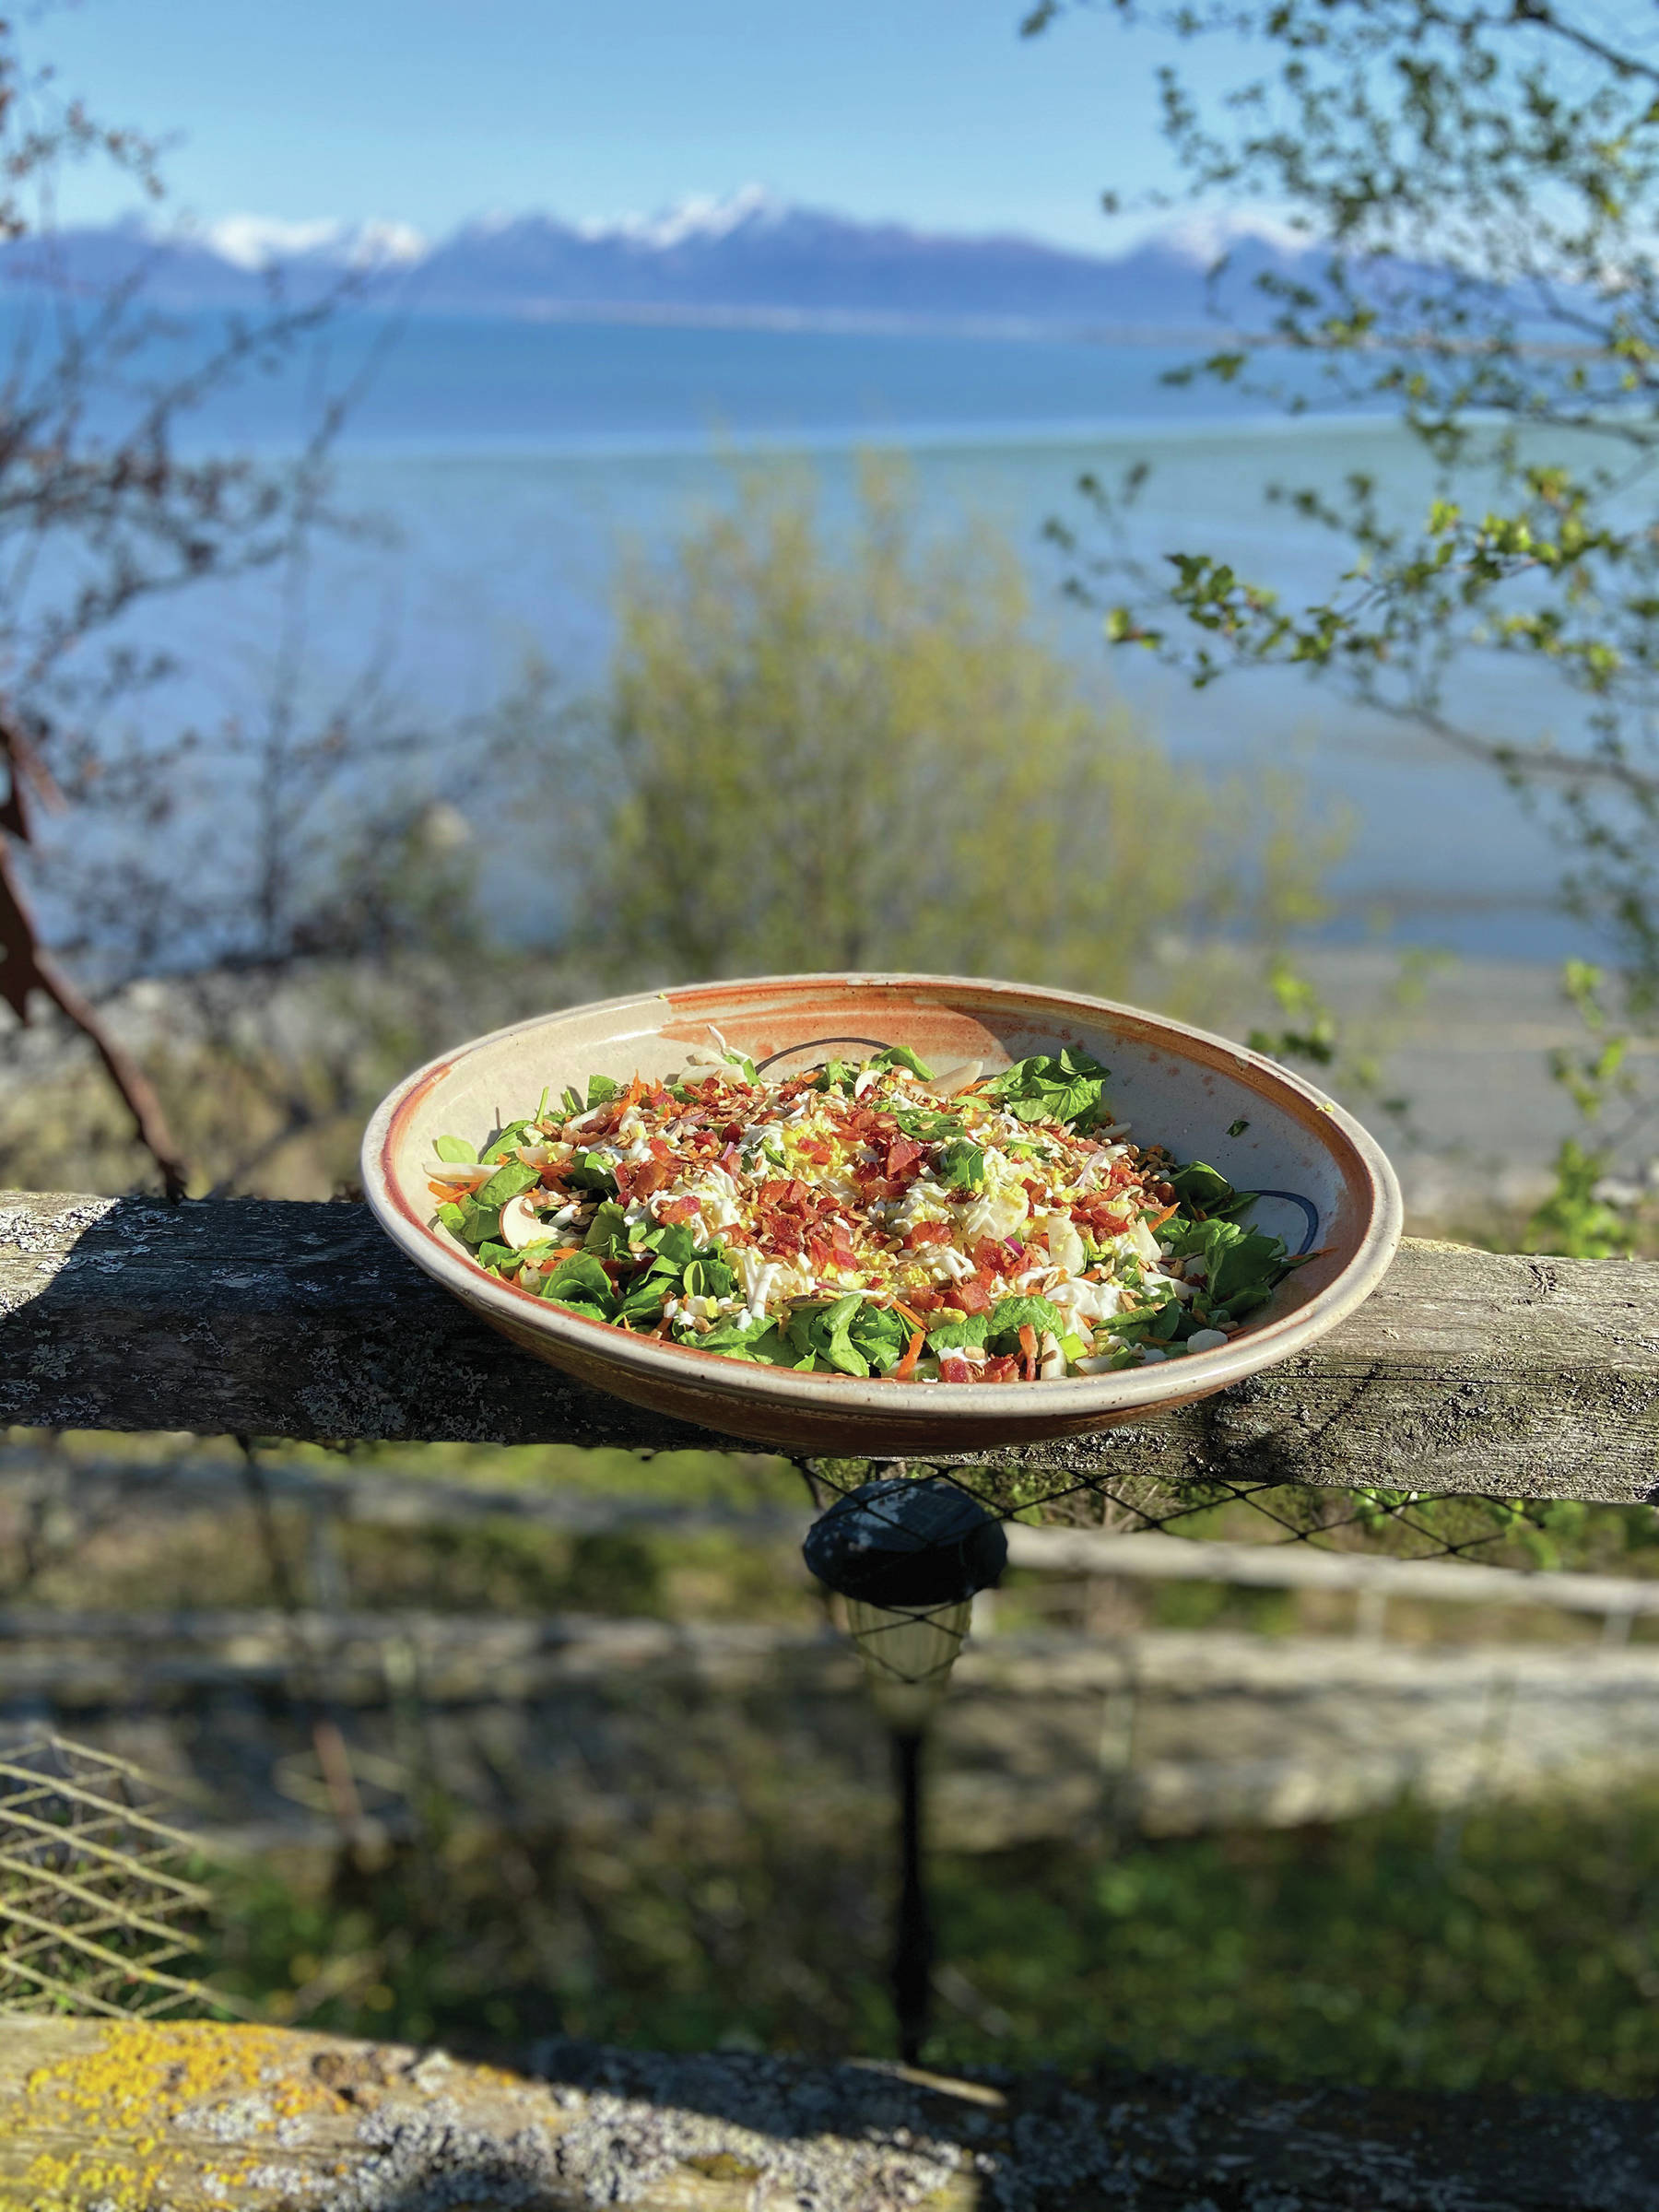 Teri’s Special Spinach Salad with Hot Bacon and Red Wine Vinaigrette is the perfect summer dish for the Memorial Day weekend. She made her recipe on May 17, 2020, at her kitchen in Homer, Alaska. (Photo by Teri Robl)